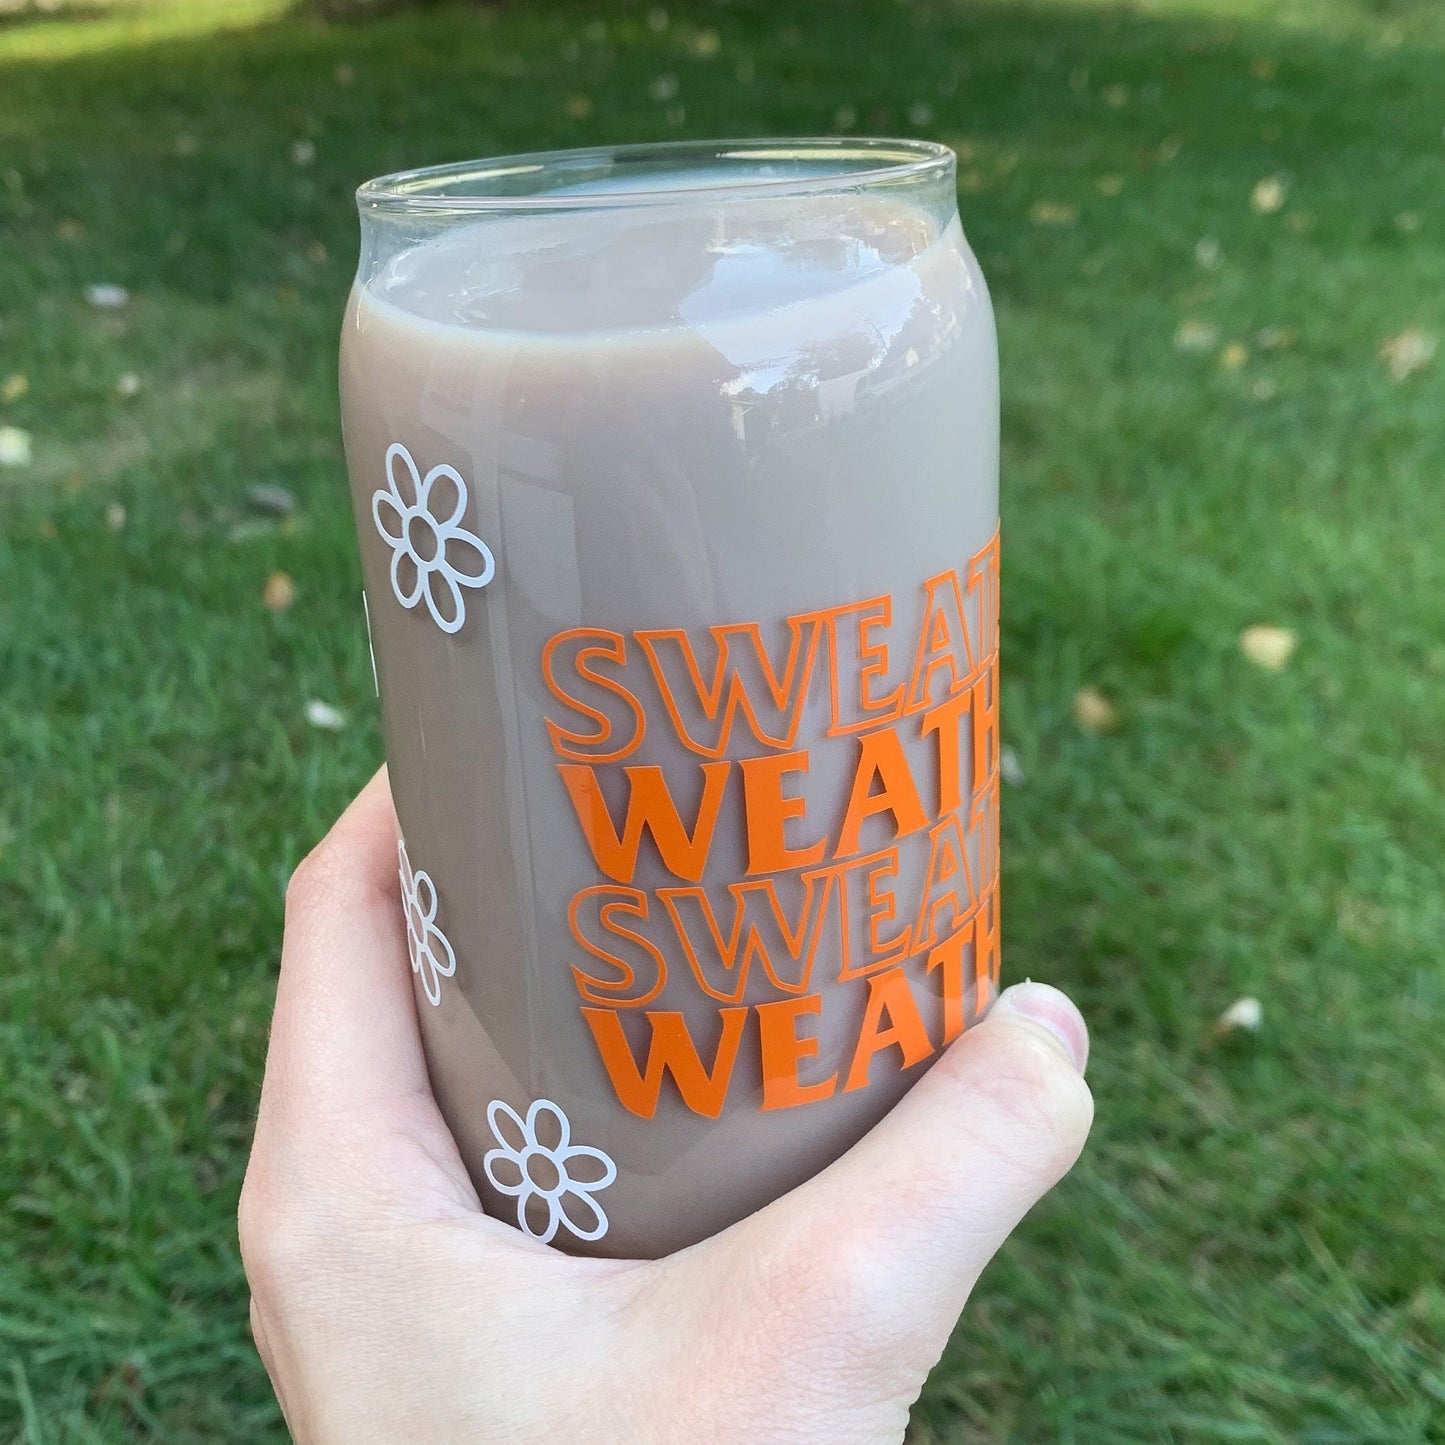 Glass cup with sweater weather written in orange lettering and white flowers surrounding entire cup.